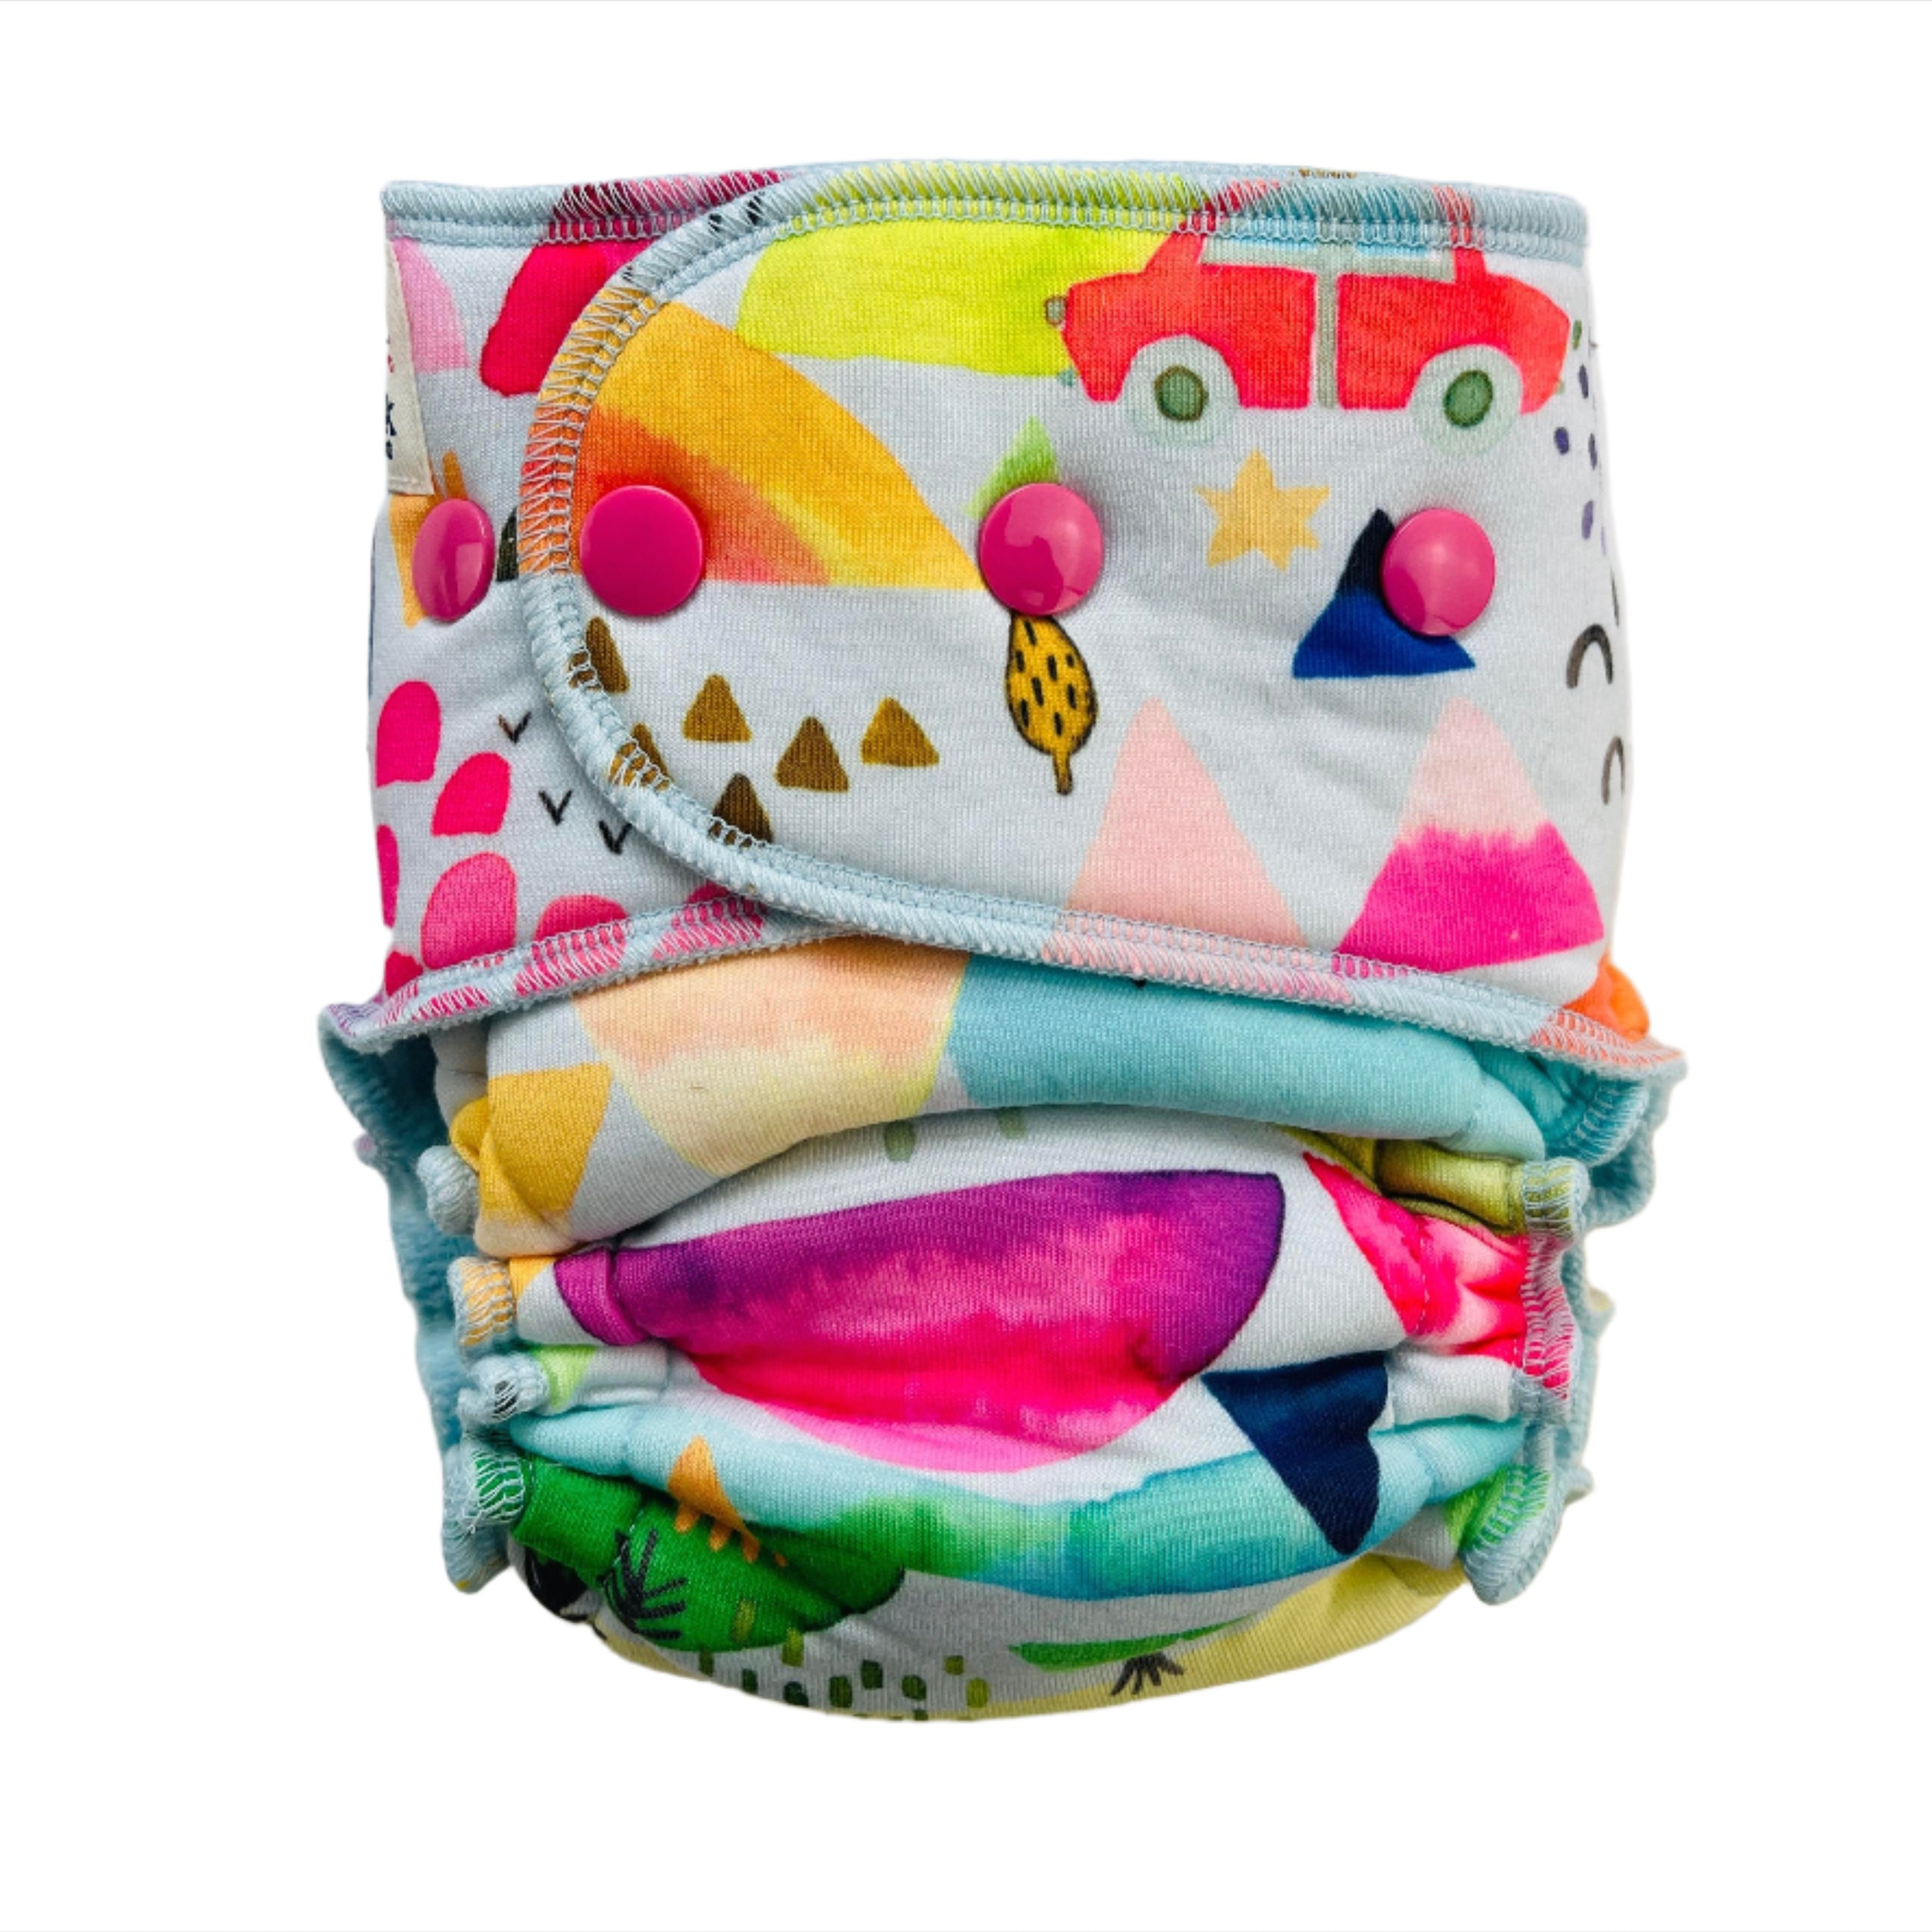 Lilly & Frank Fitted Cloth Diaper Let The Adventure Begin Petite Hybrid Cloth Diaper - Hybrid - Classic Serged